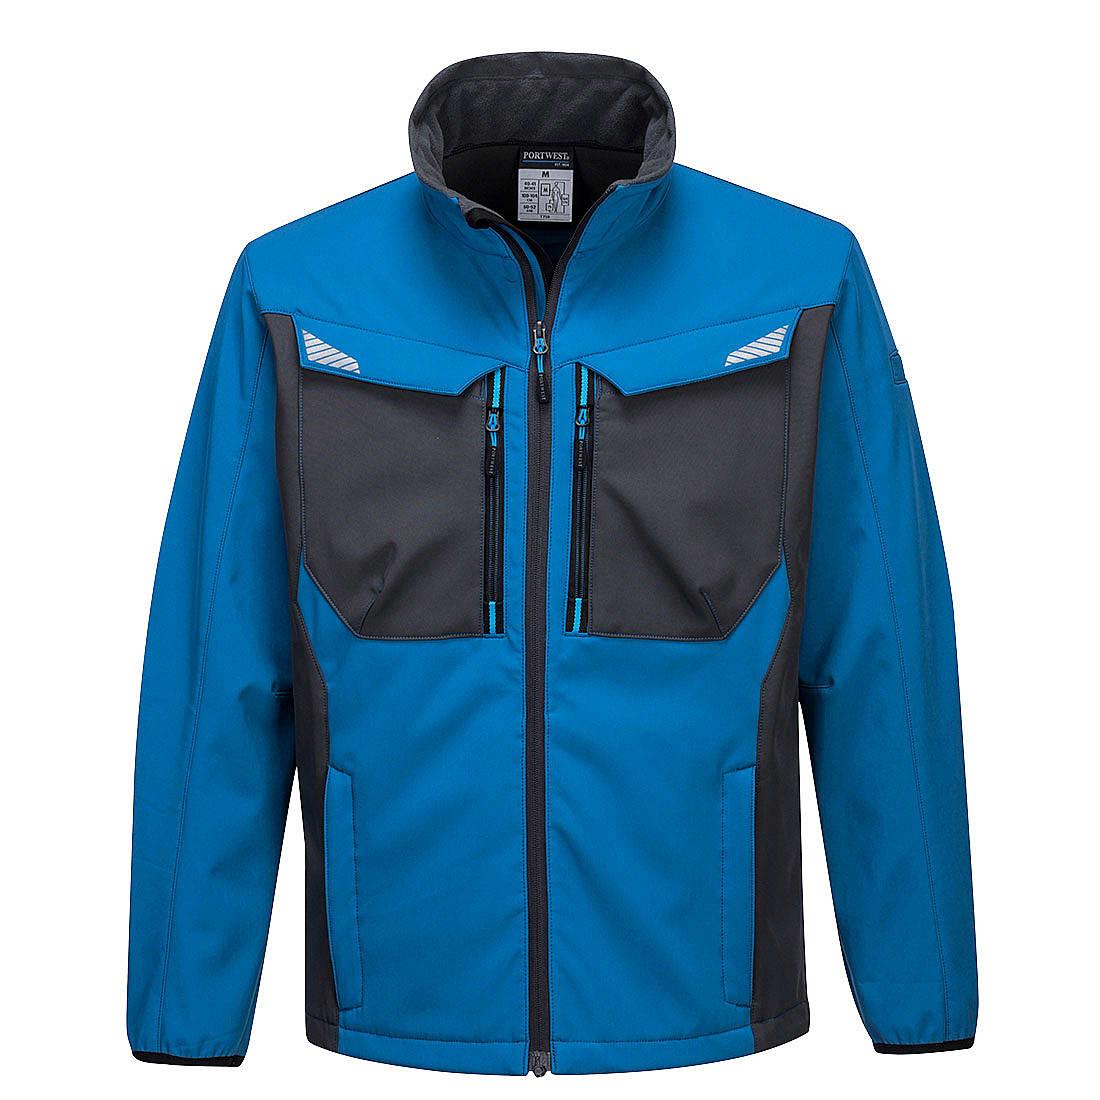 Portwest WX3 Softshell Jacket in Persian (Product Code: T750)